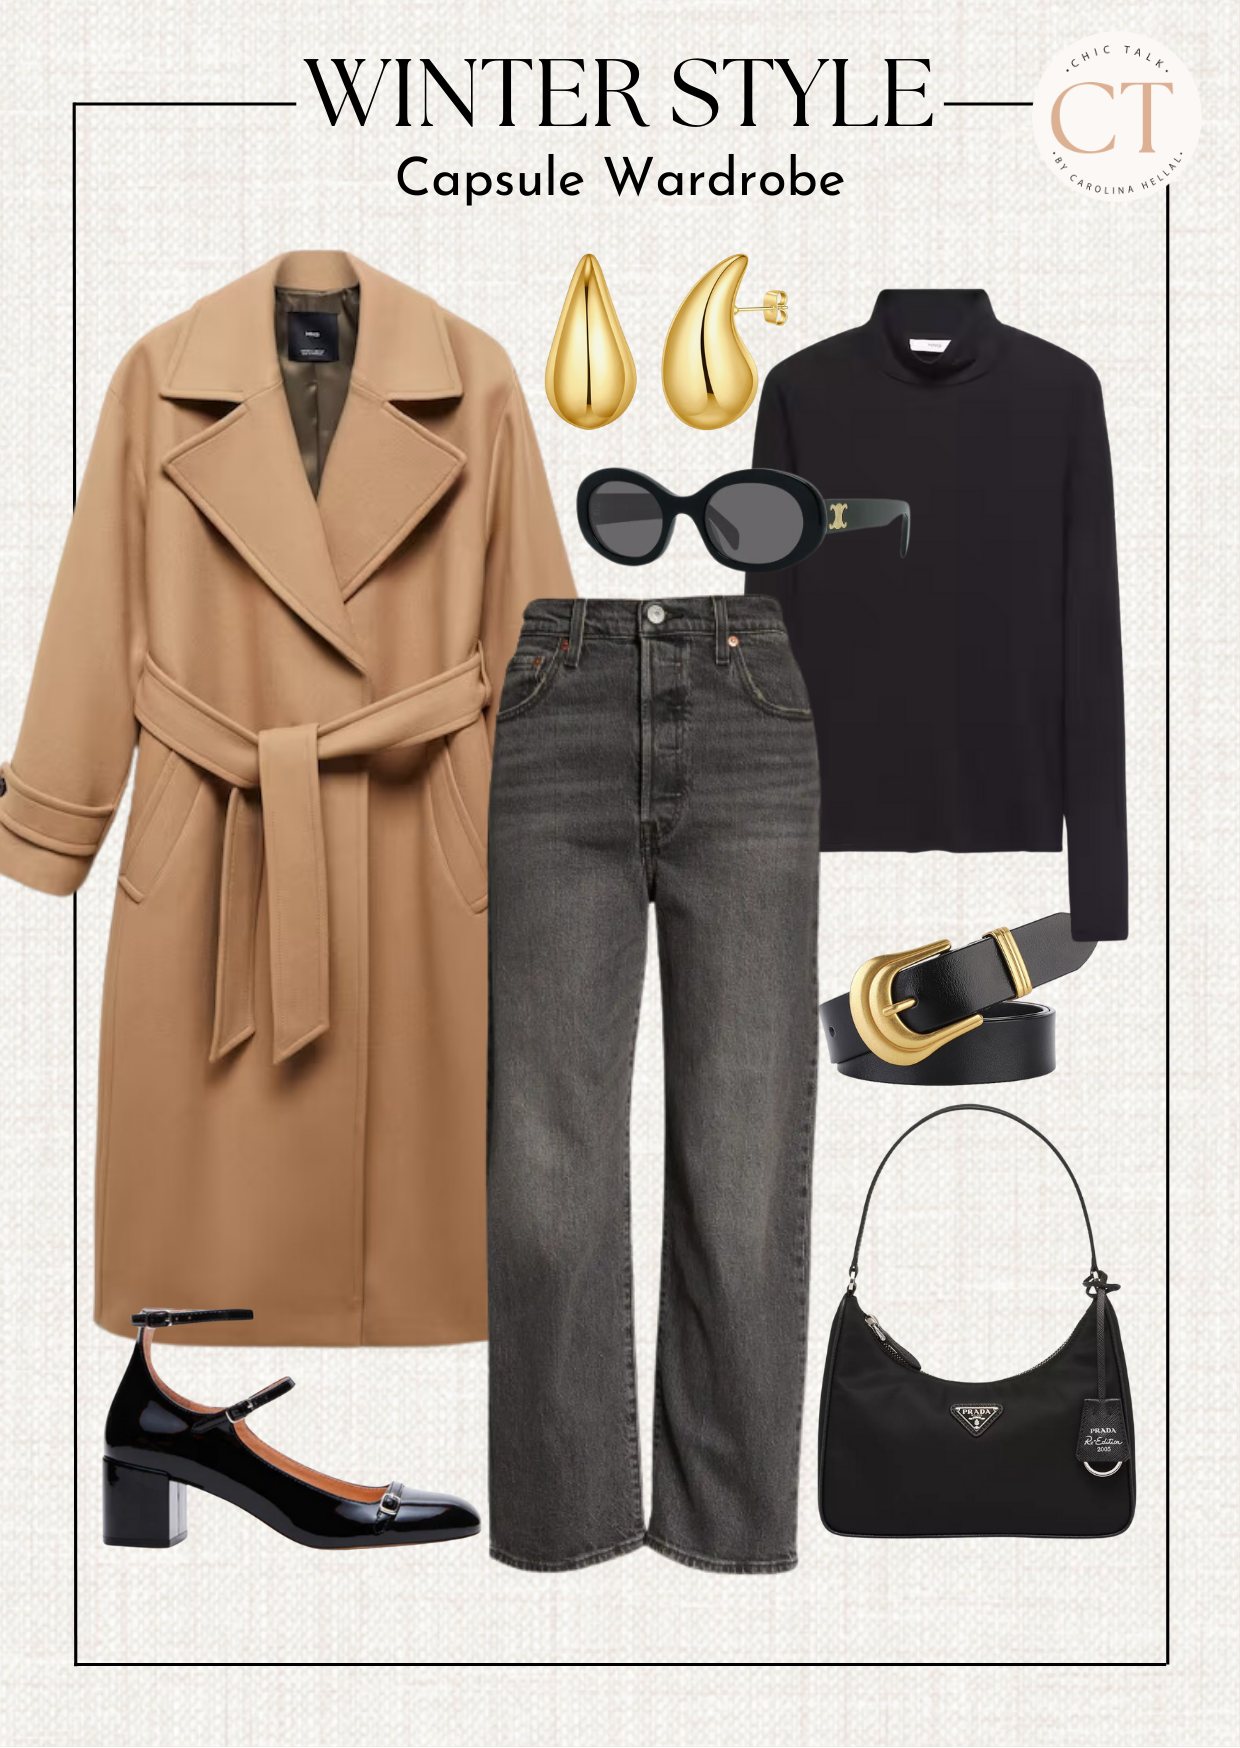 Winter style guide - CHIC TALK